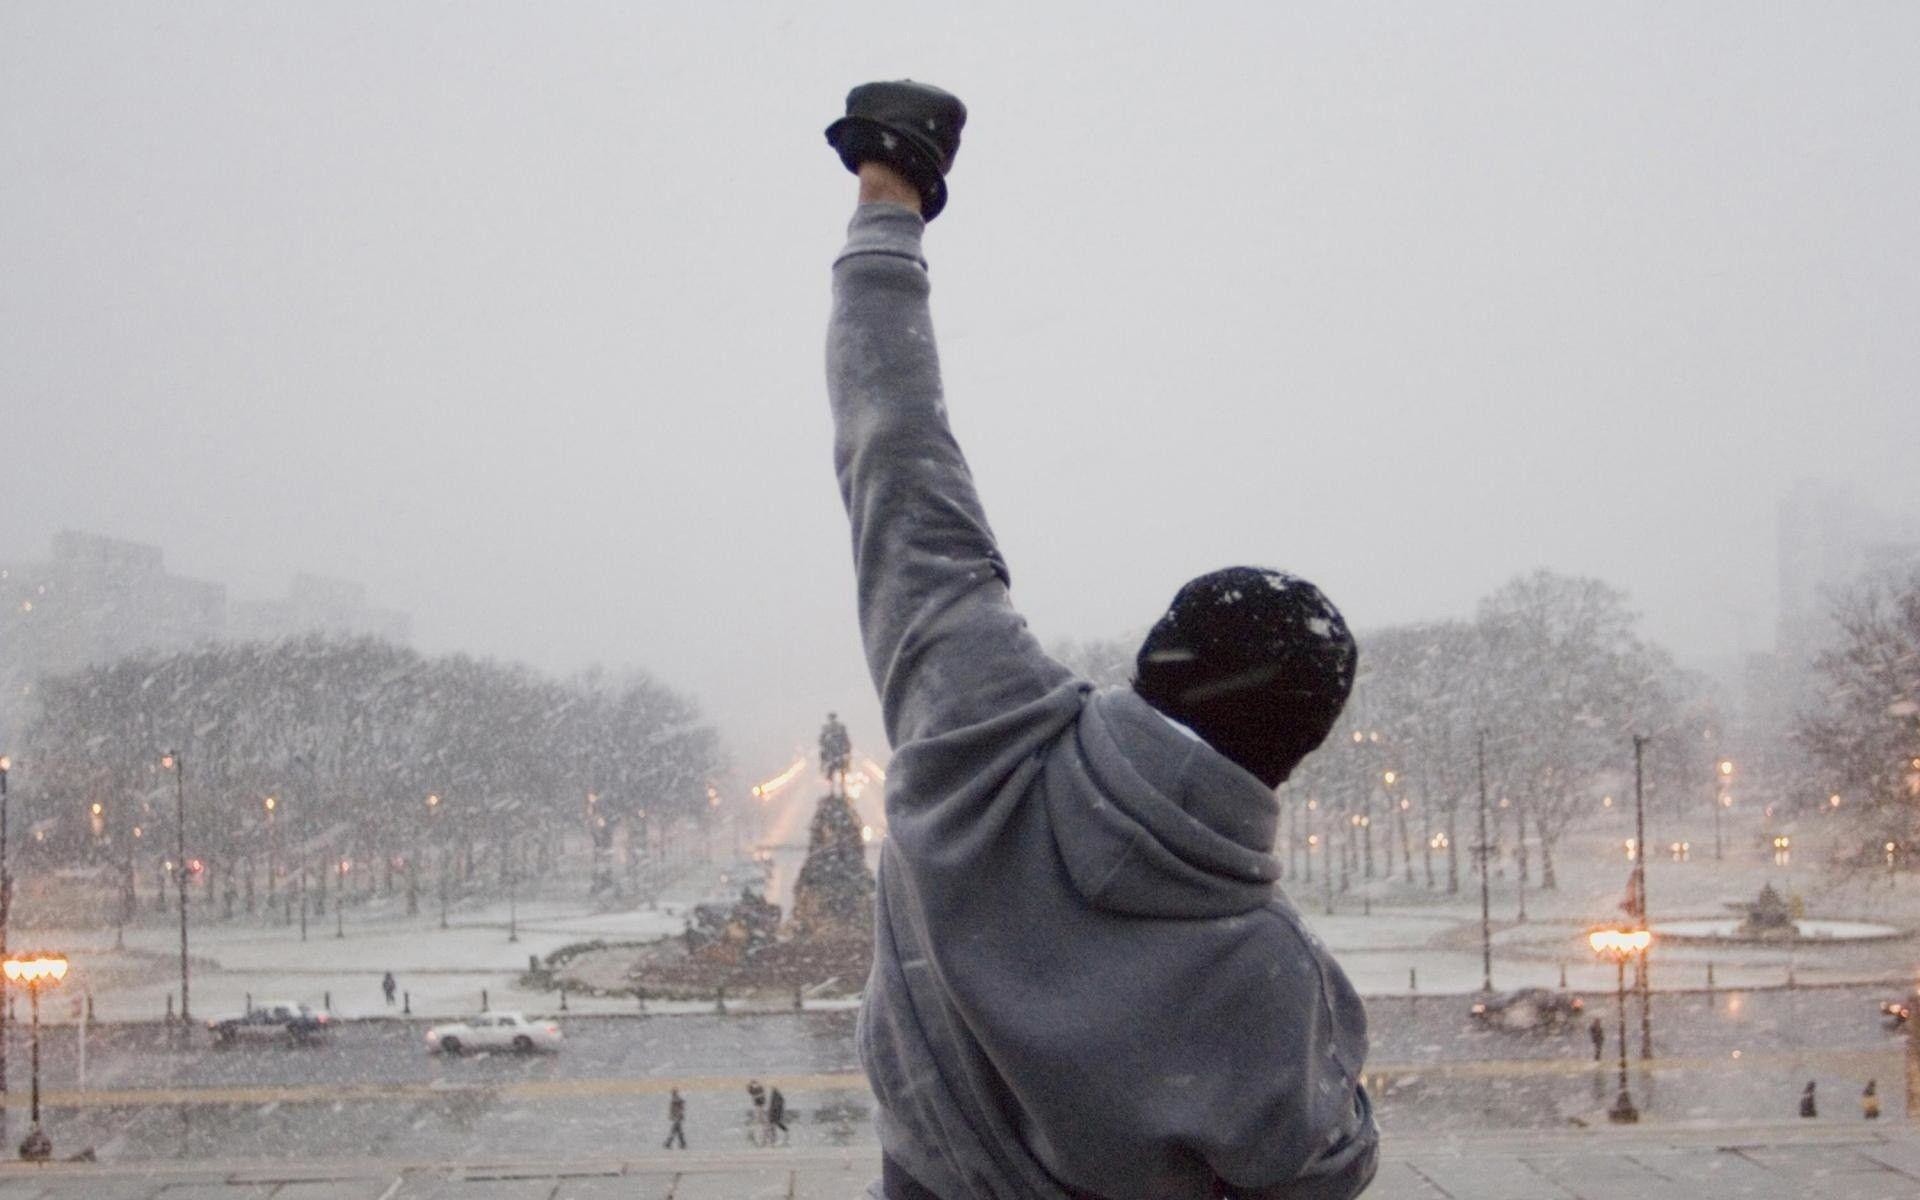 1920x1200 Sylvester Stallone As Rocky Balboa Wallpaper Wide or HD | Male .